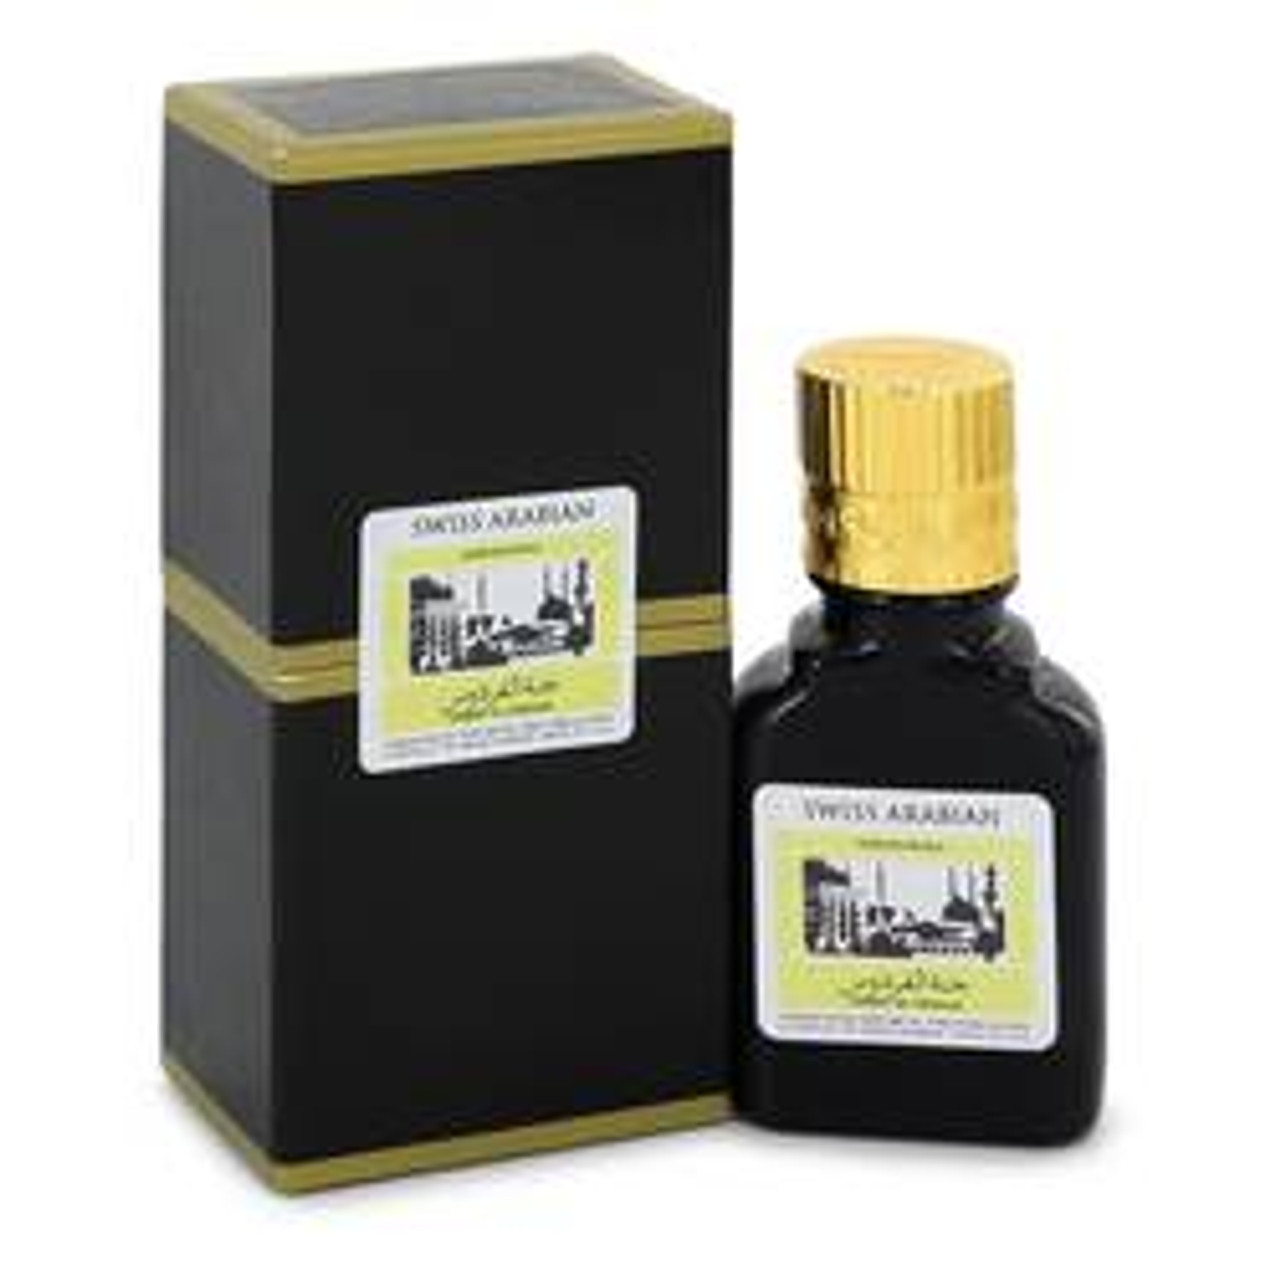 Jannet El Firdaus Cologne By Swiss Arabian Concentrated Perfume Oil Free From Alcohol (Unisex Black Edit 0.3 oz for Men - [From 67.00 - Choose pk Qty ] - *Ships from Miami